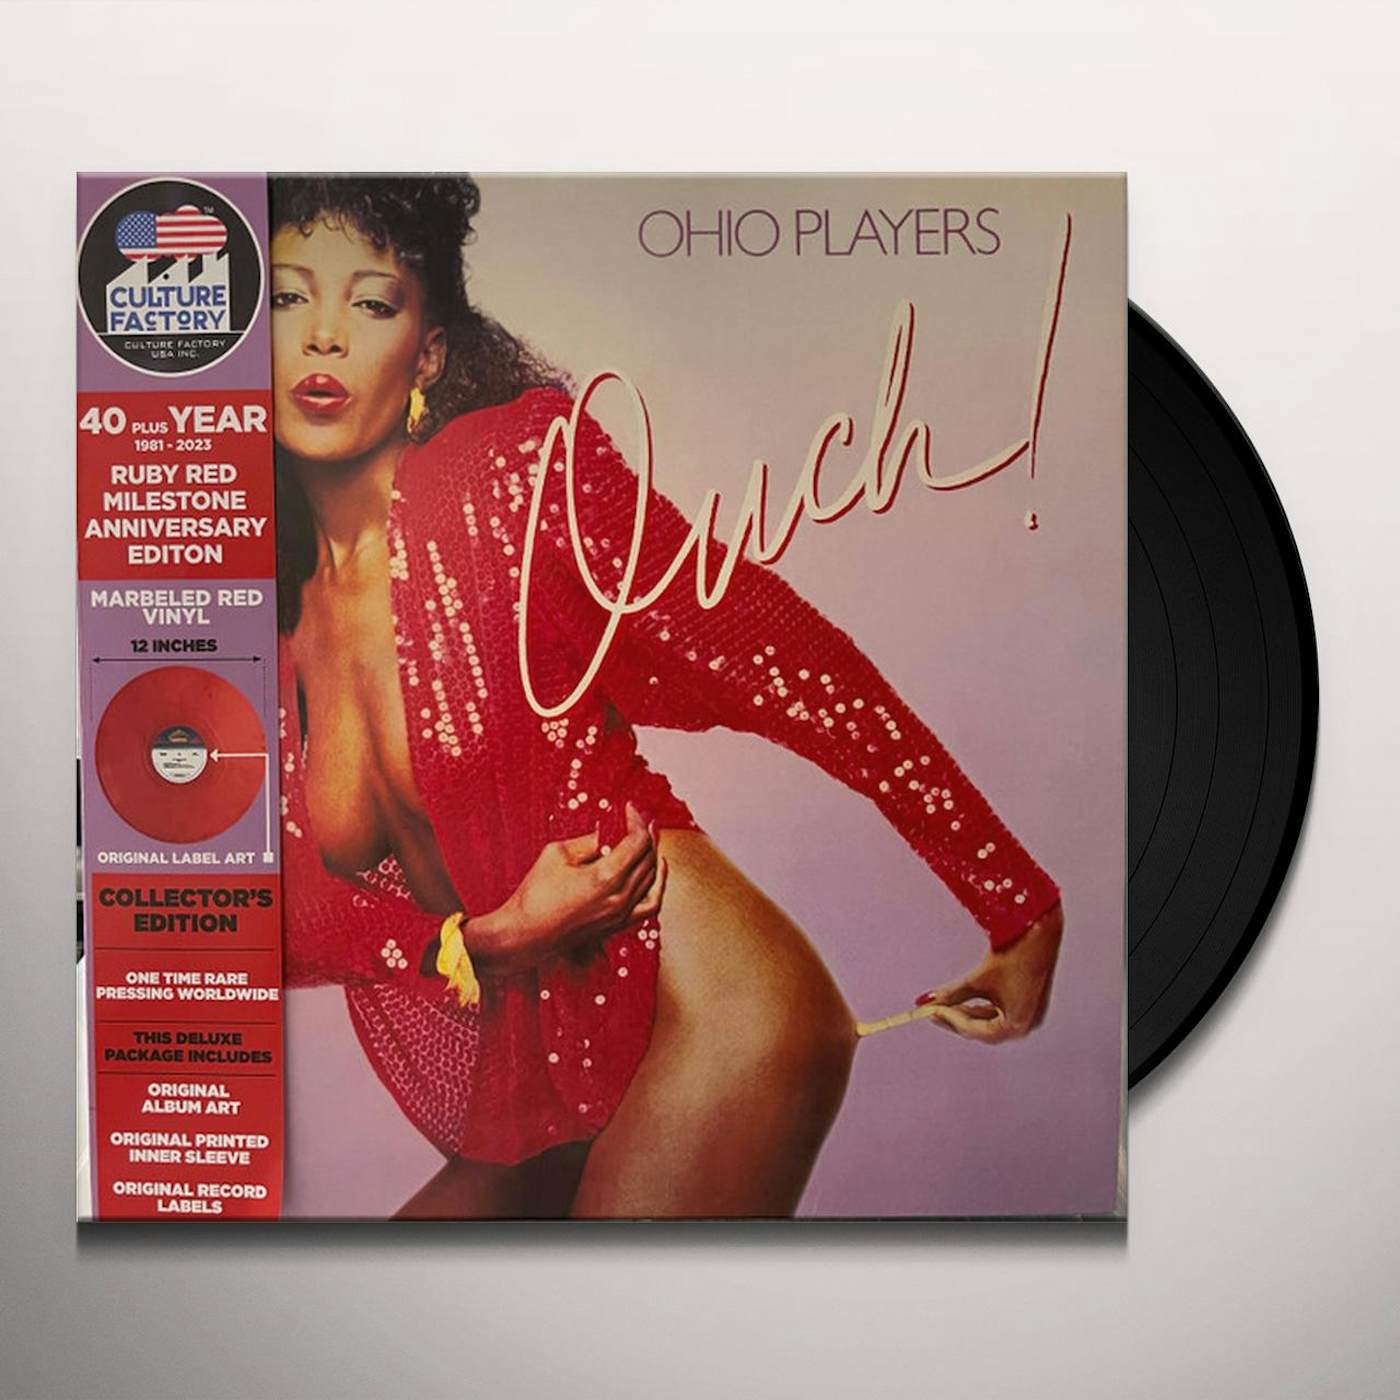 Ohio Players OUCH Vinyl Record